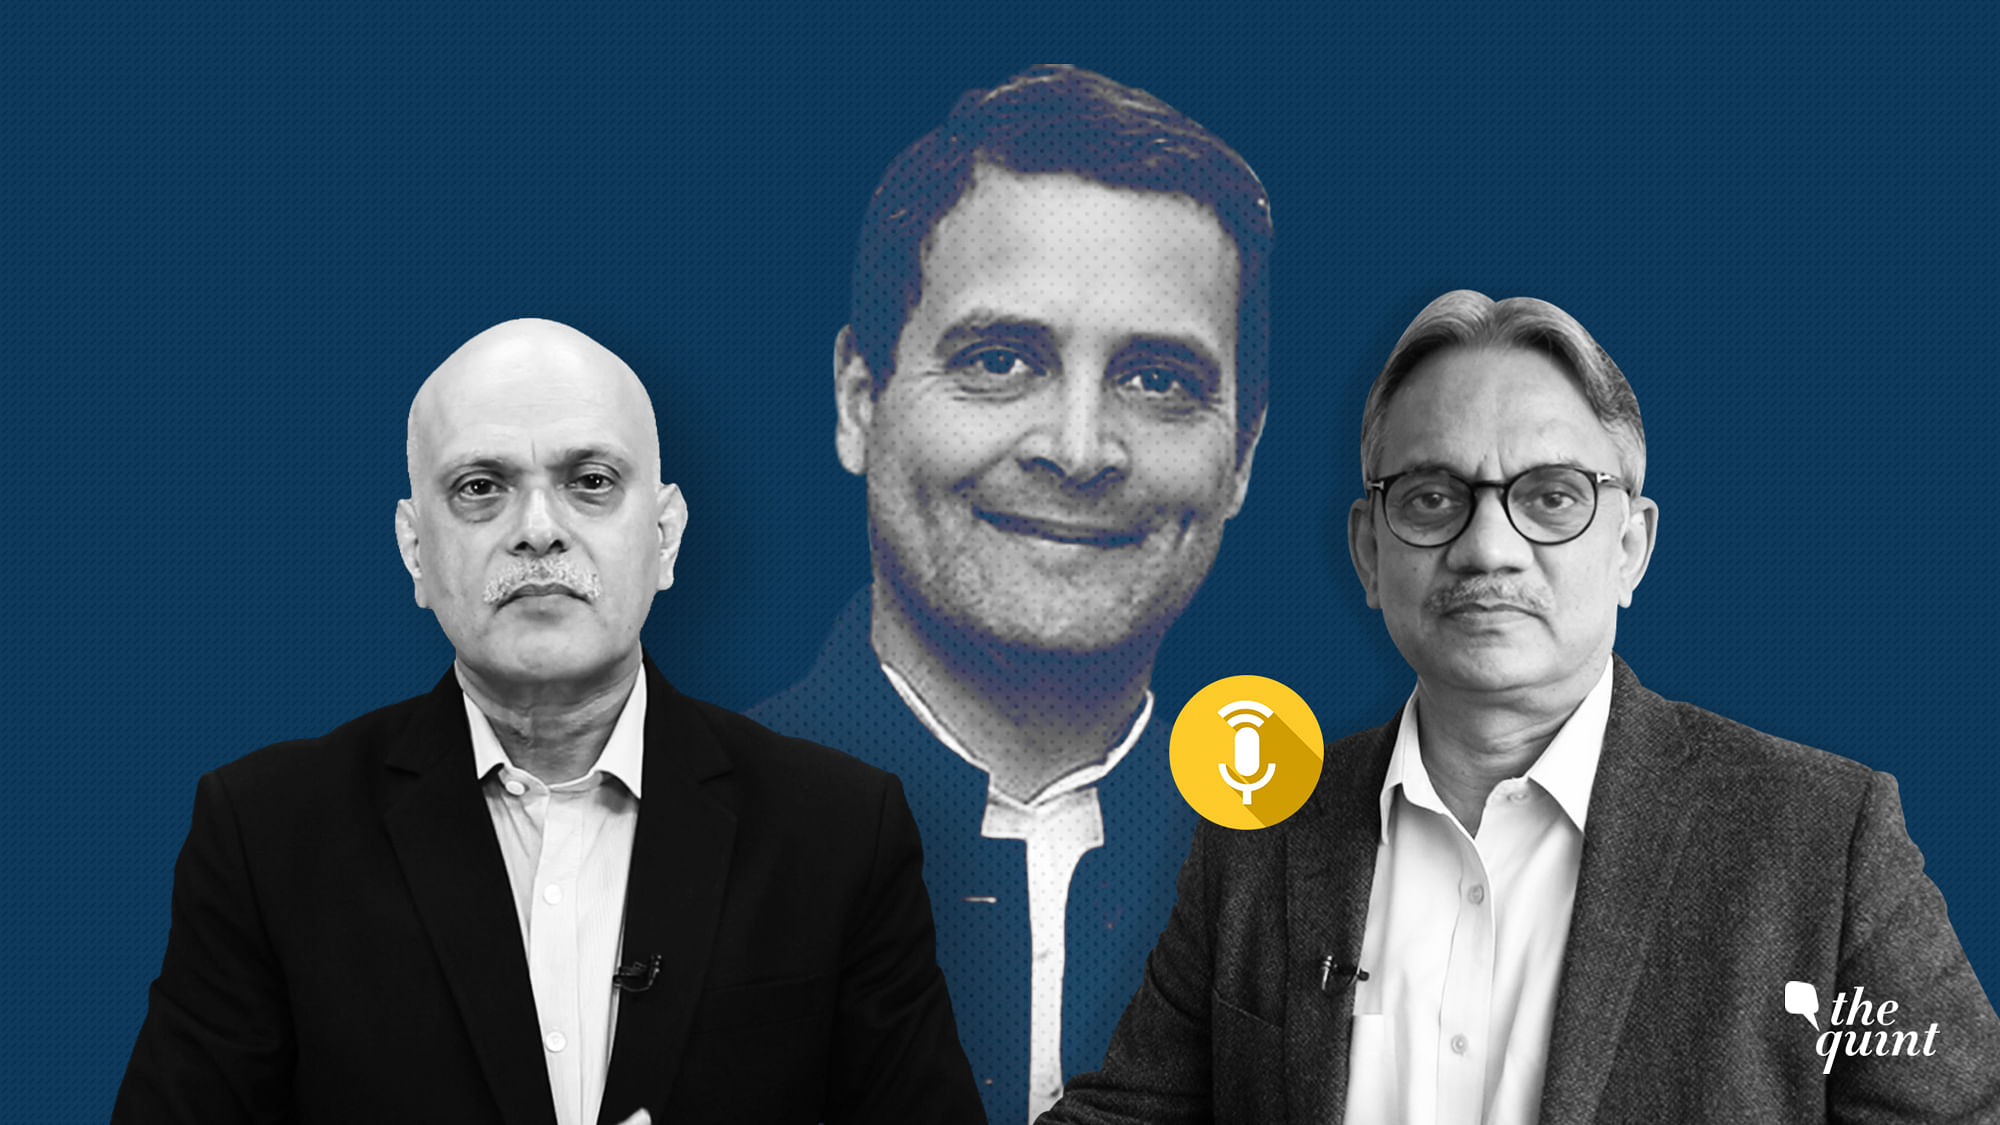 Rahul Gandhi, President of the Indian National Congress, speaks to Raghav Bahl, Founder and Editor-in-Chief of The Quint and Sanjay Pugalia, Editorial Director of The Quint.